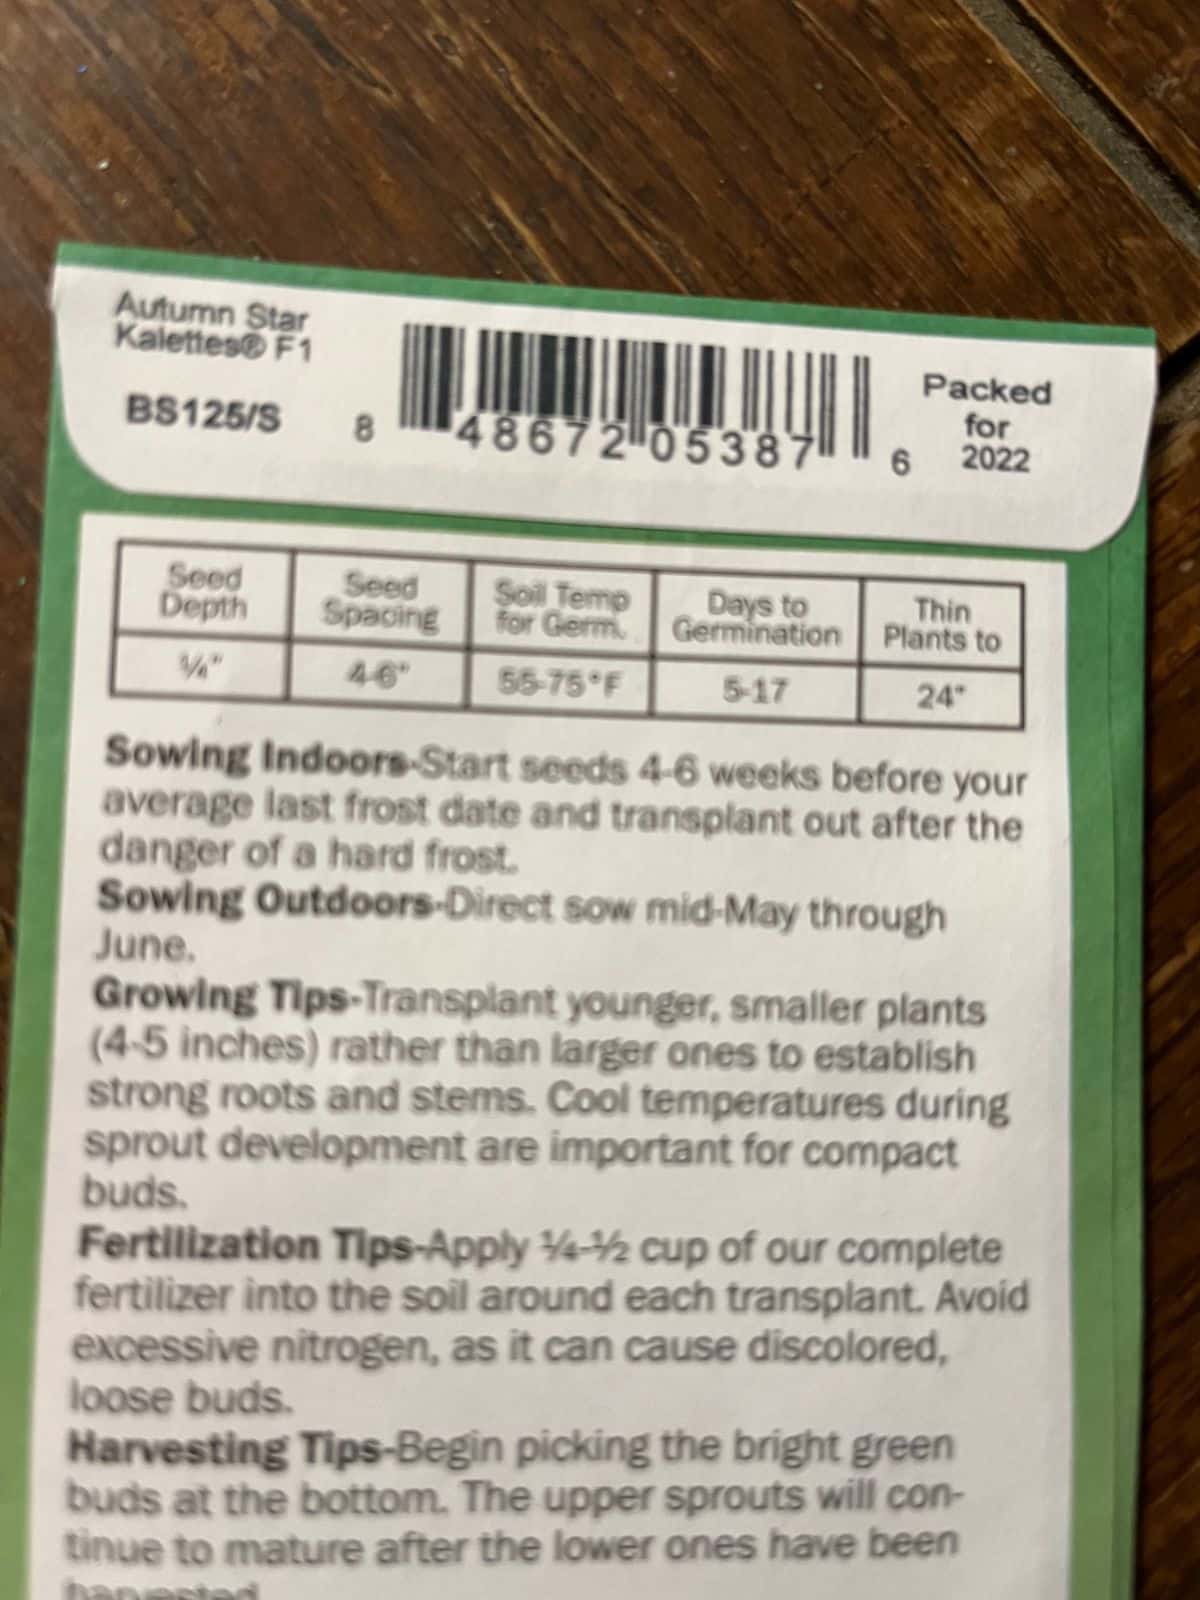 It's good to know how old your seeds are but you should save money and plant stored seed